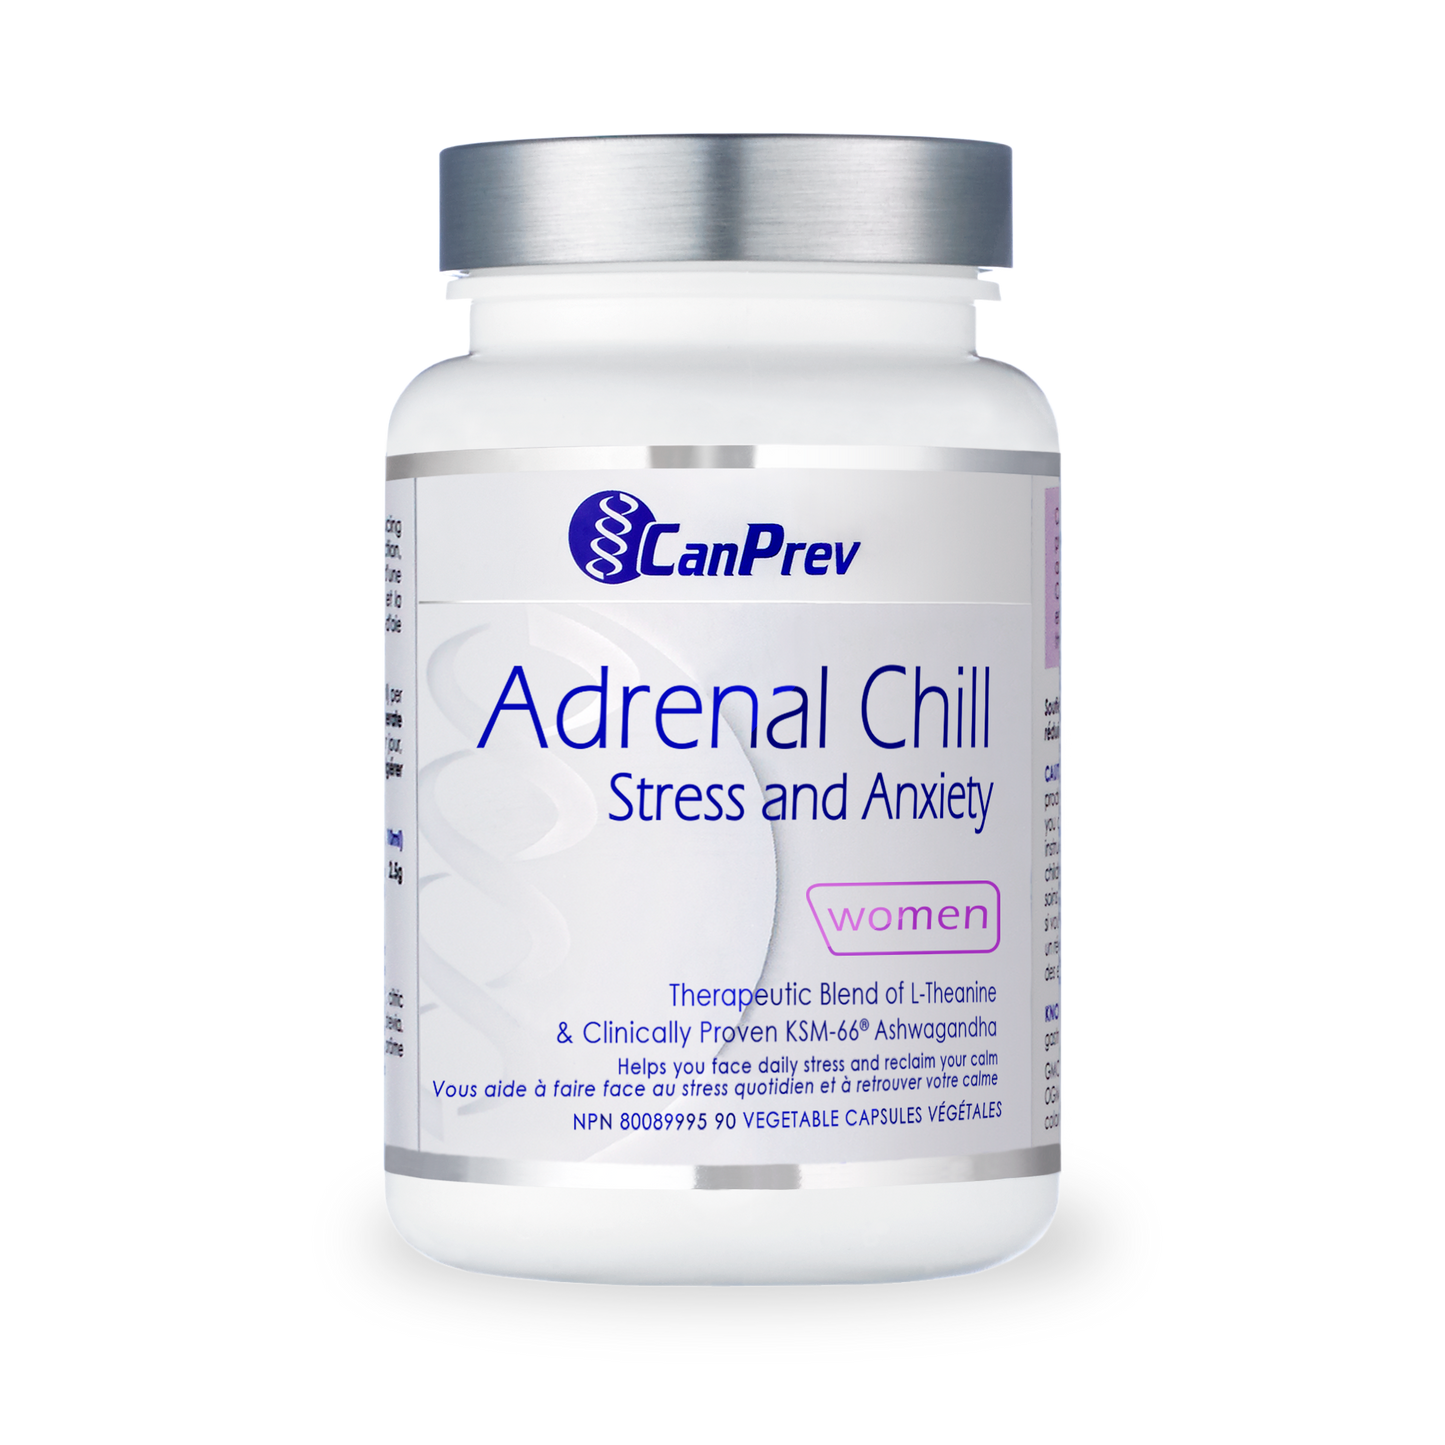 CanPrev Adrenal Chill stress and anxiety